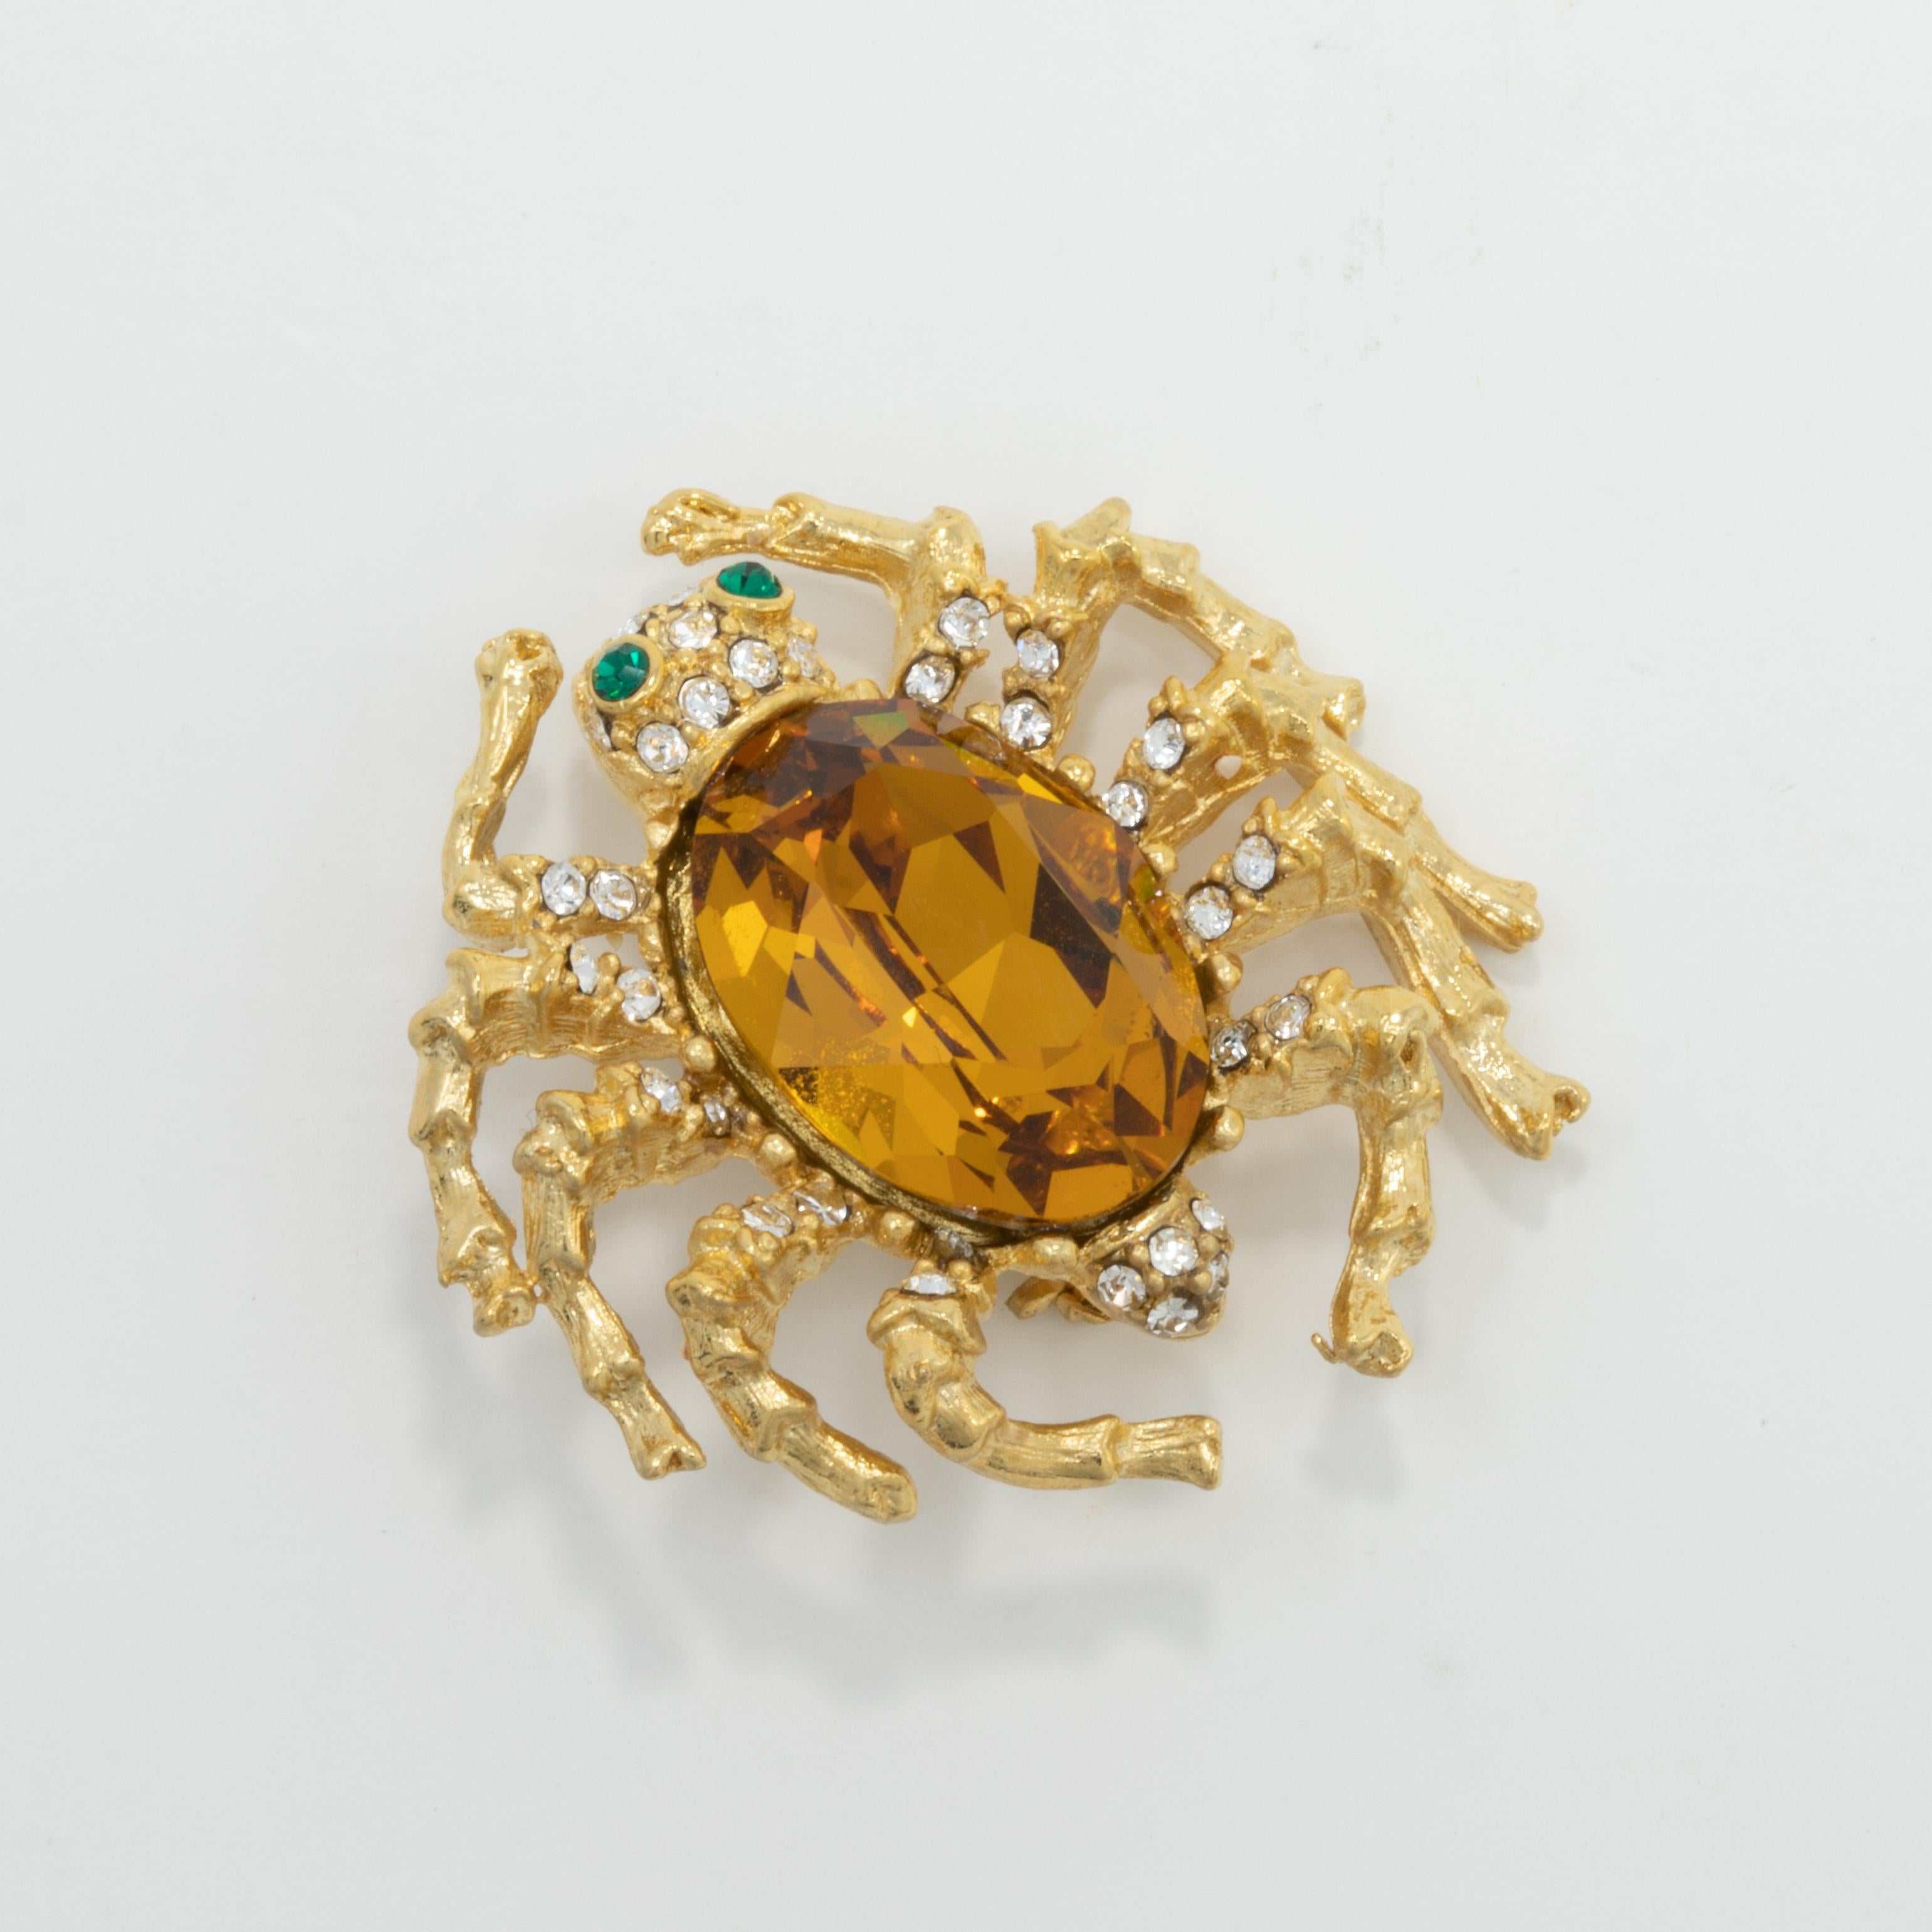 Dazzling Kenneth Jay Lane brooch. This golden spider is decorated with small emerald and clear crystals, and a large amber crystal center.

Tags, Marks, Hallmarks: Kenneth Lane